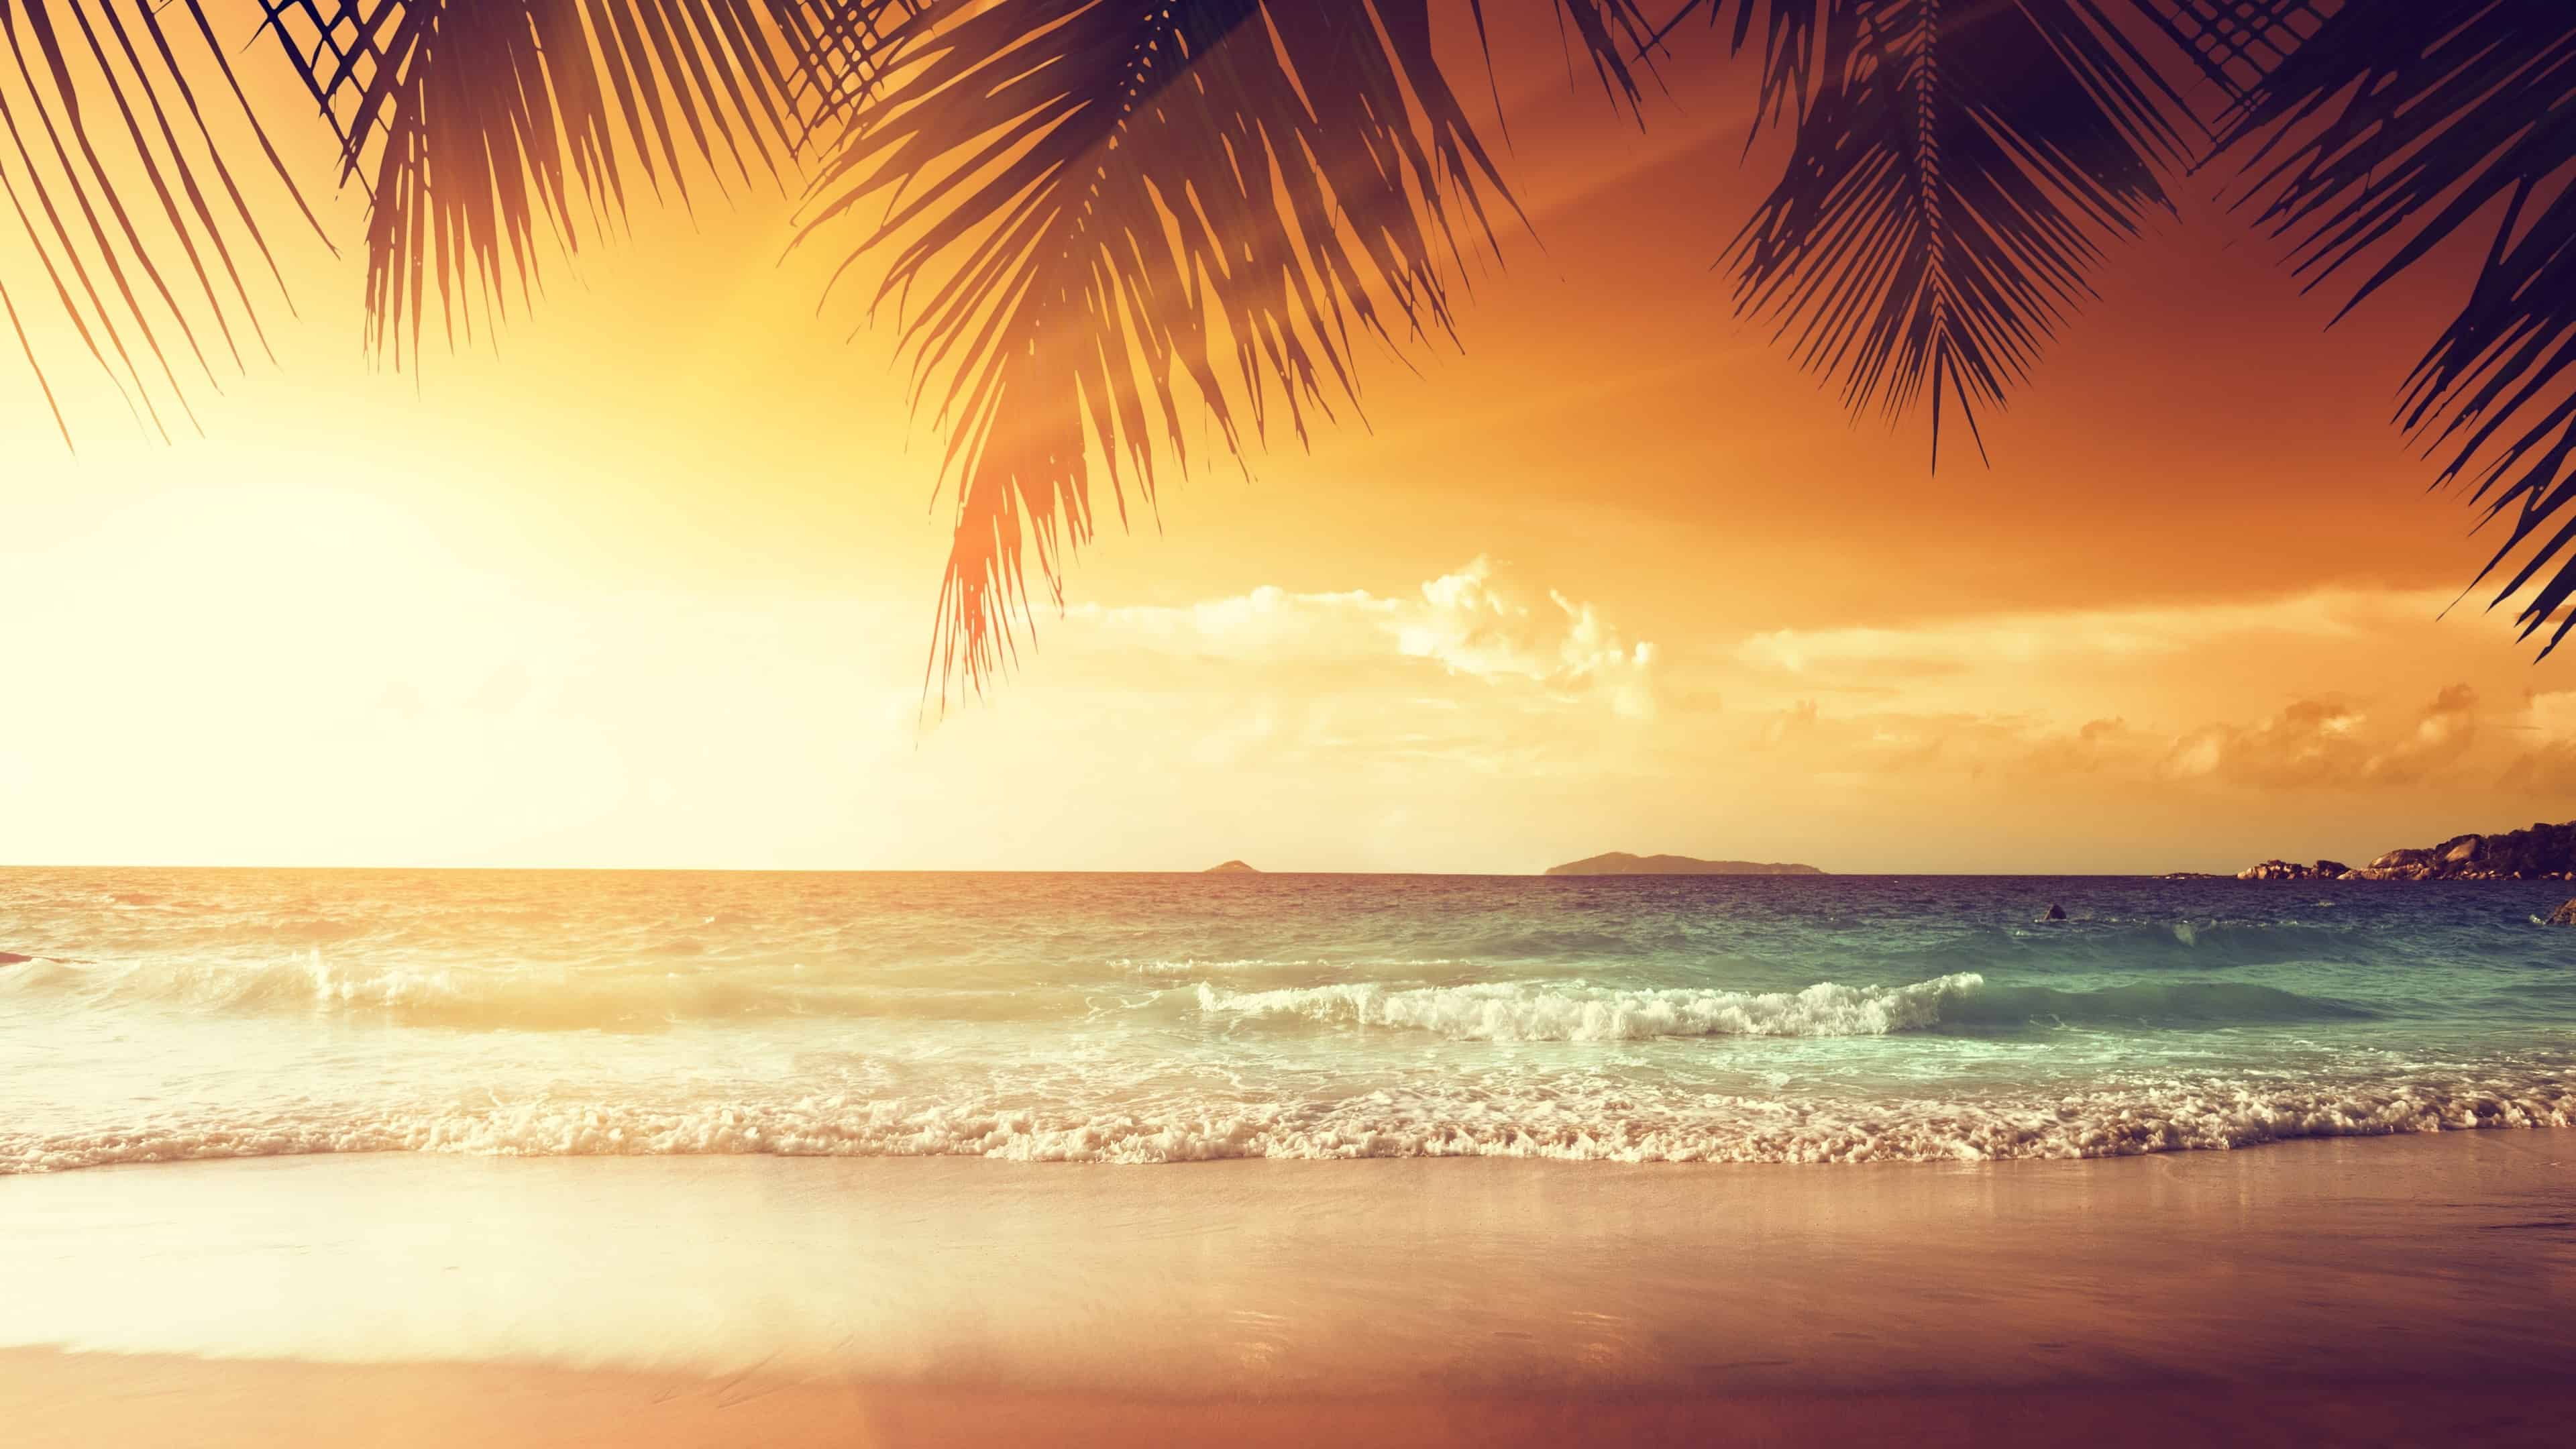 tropical beach with palm trees at sunset uhd 4k